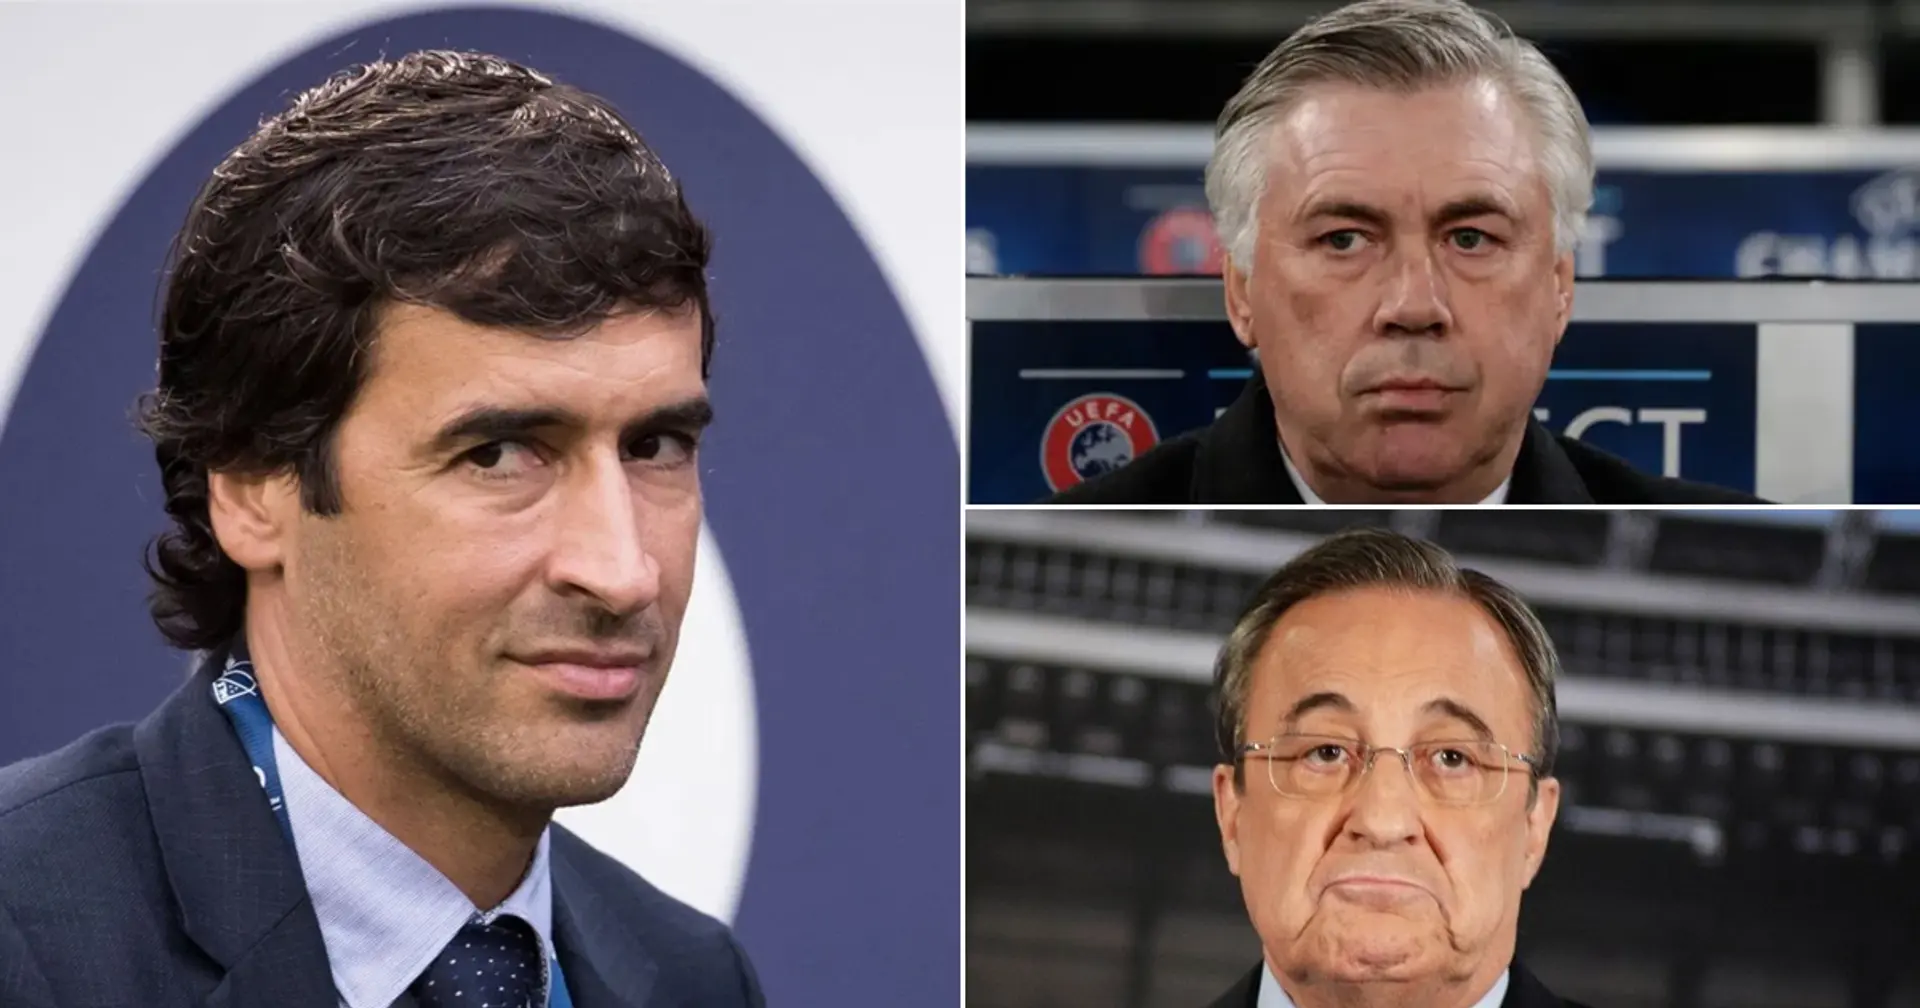 Perez says Raul will become Madrid manager in future, explains why it didn't happen this year